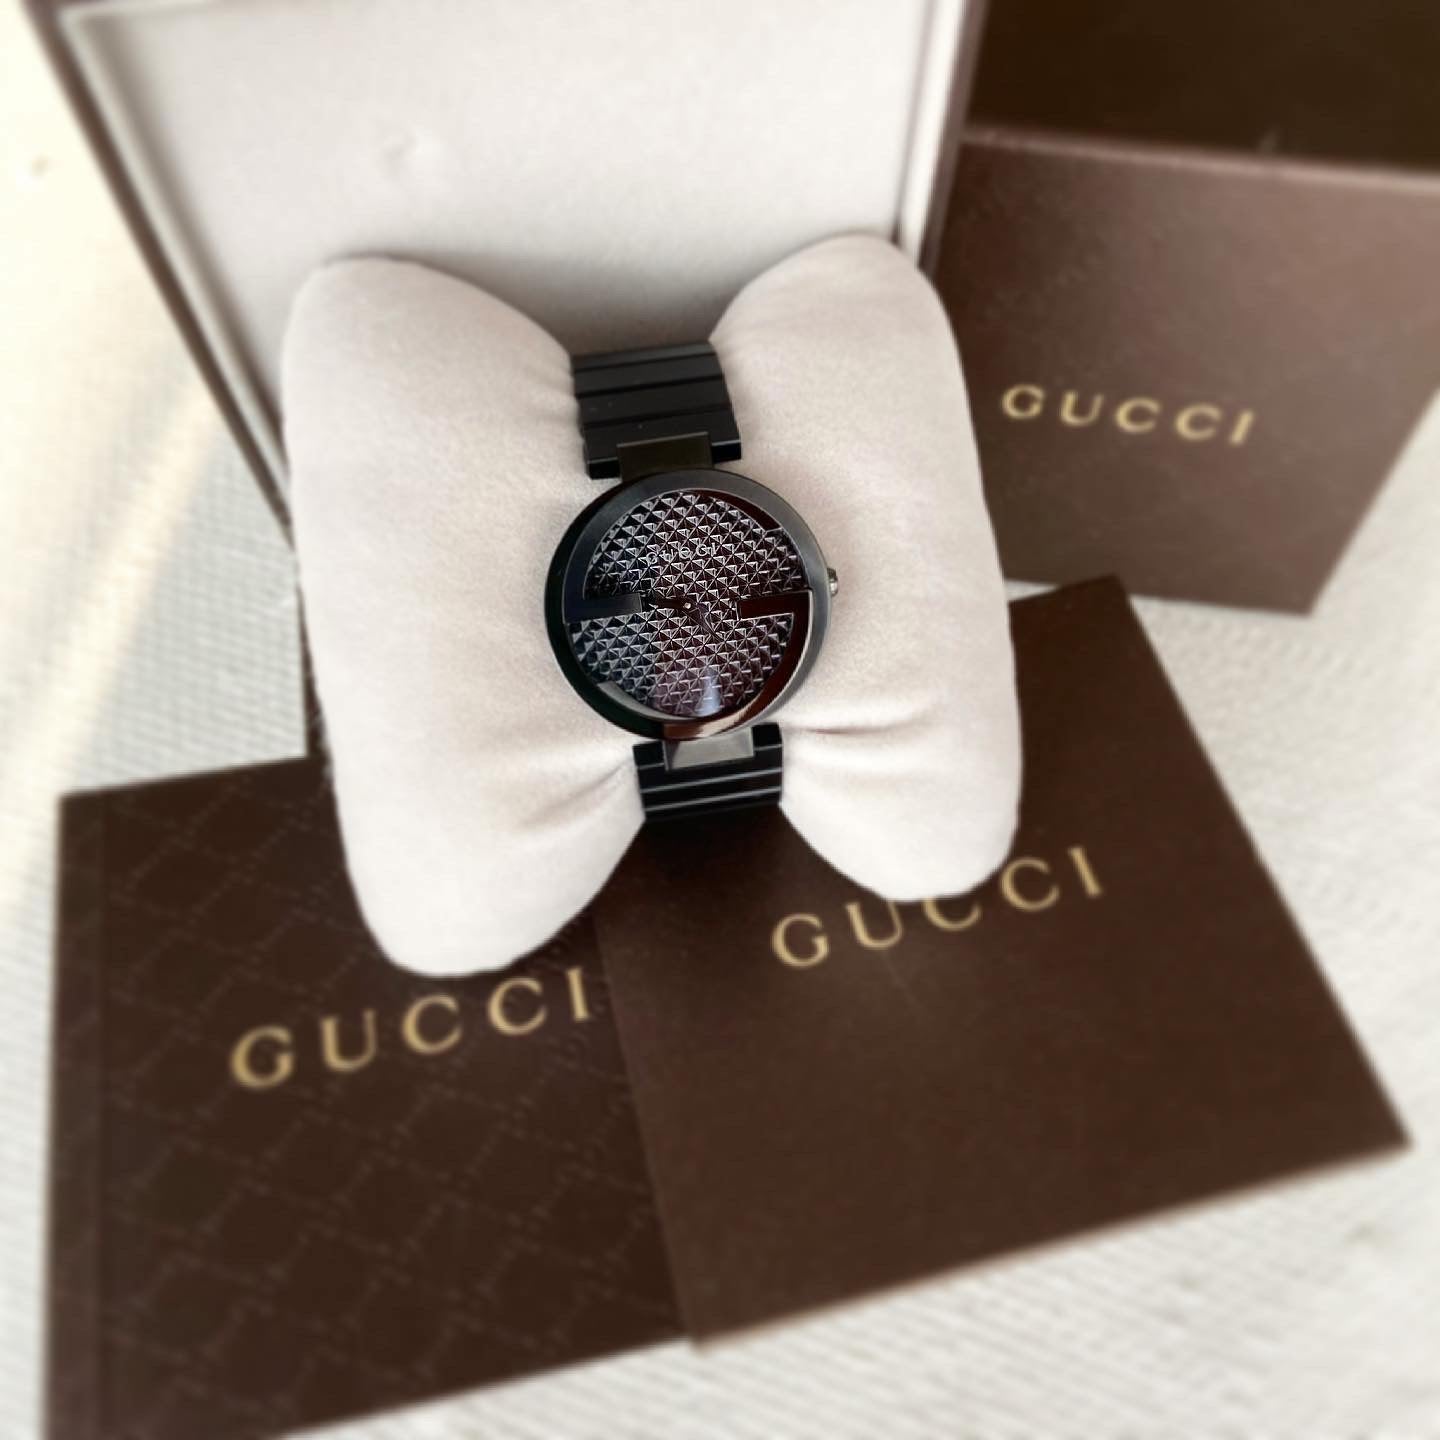 GUCCI 133.3 Series So black Limited Edition